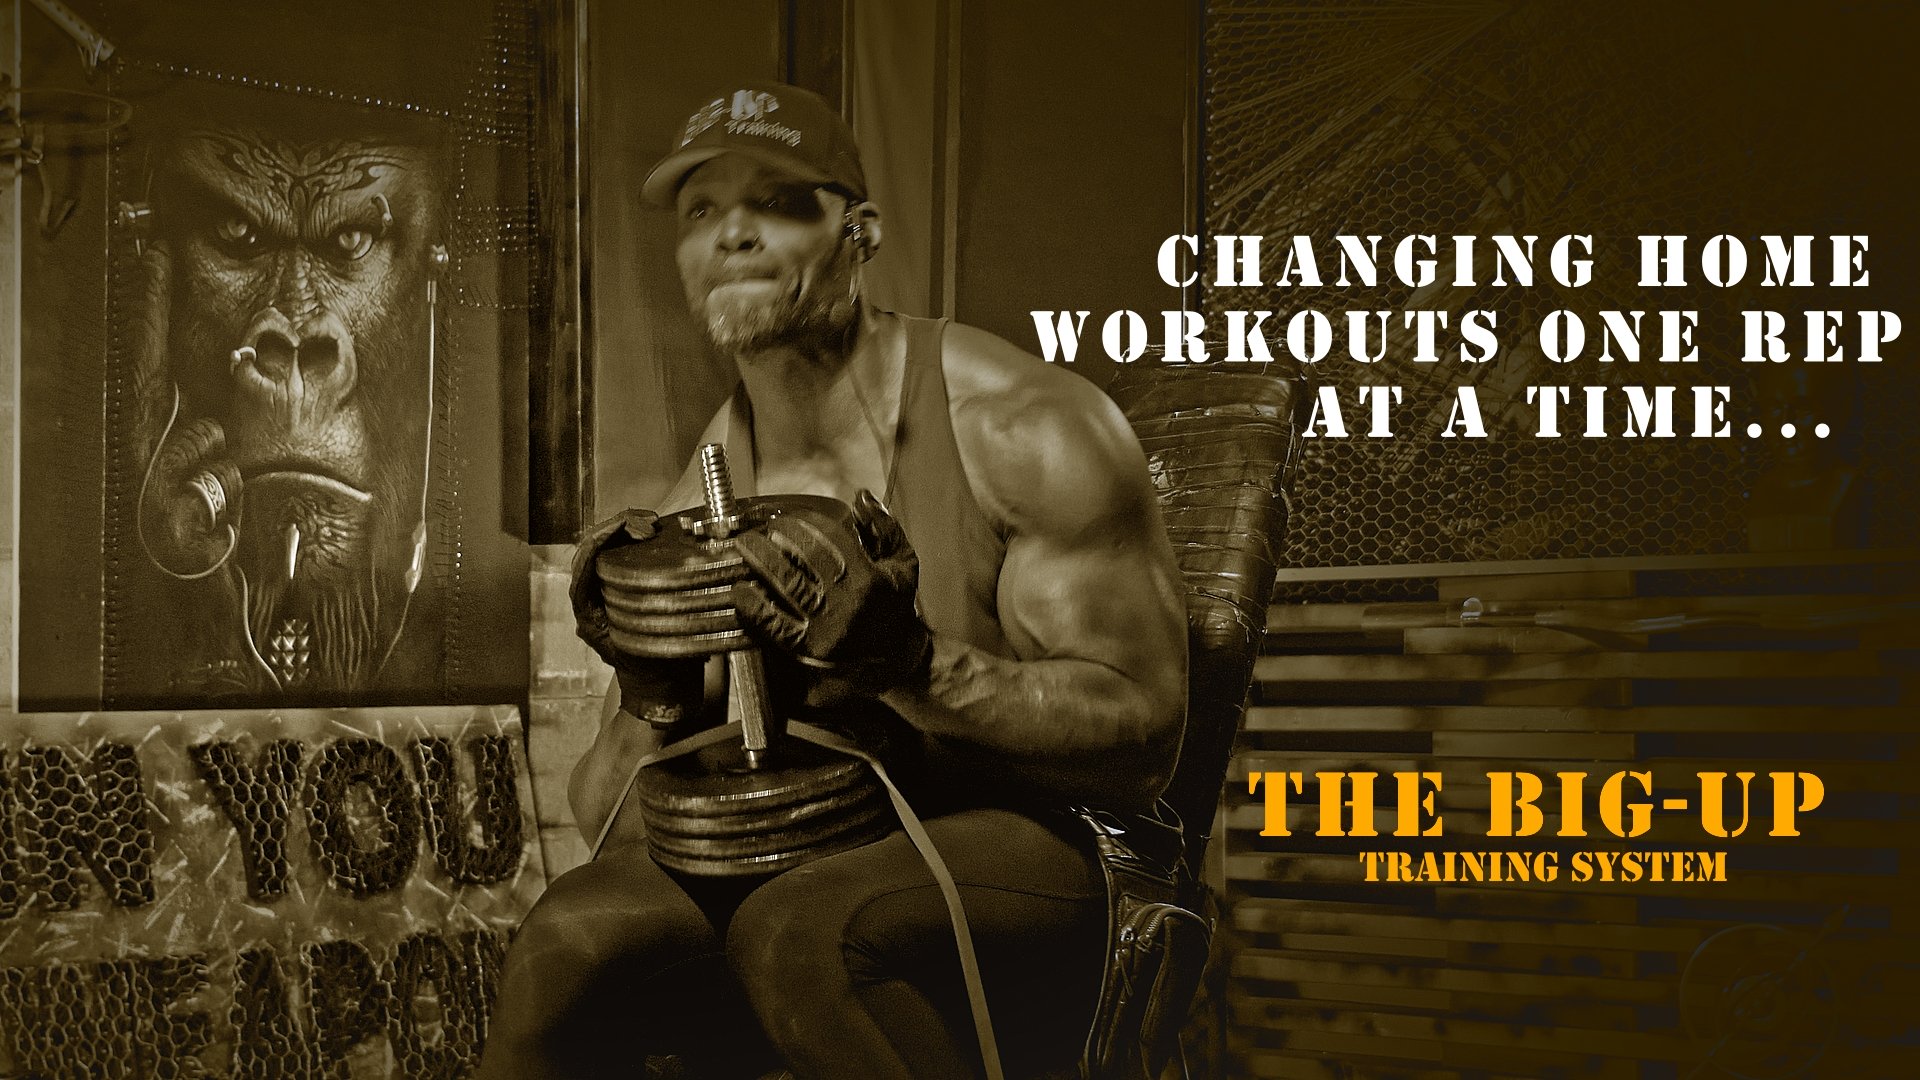 Arguably the best home workout program for building muscle and creating a better physique, the BIG-UP Training System.